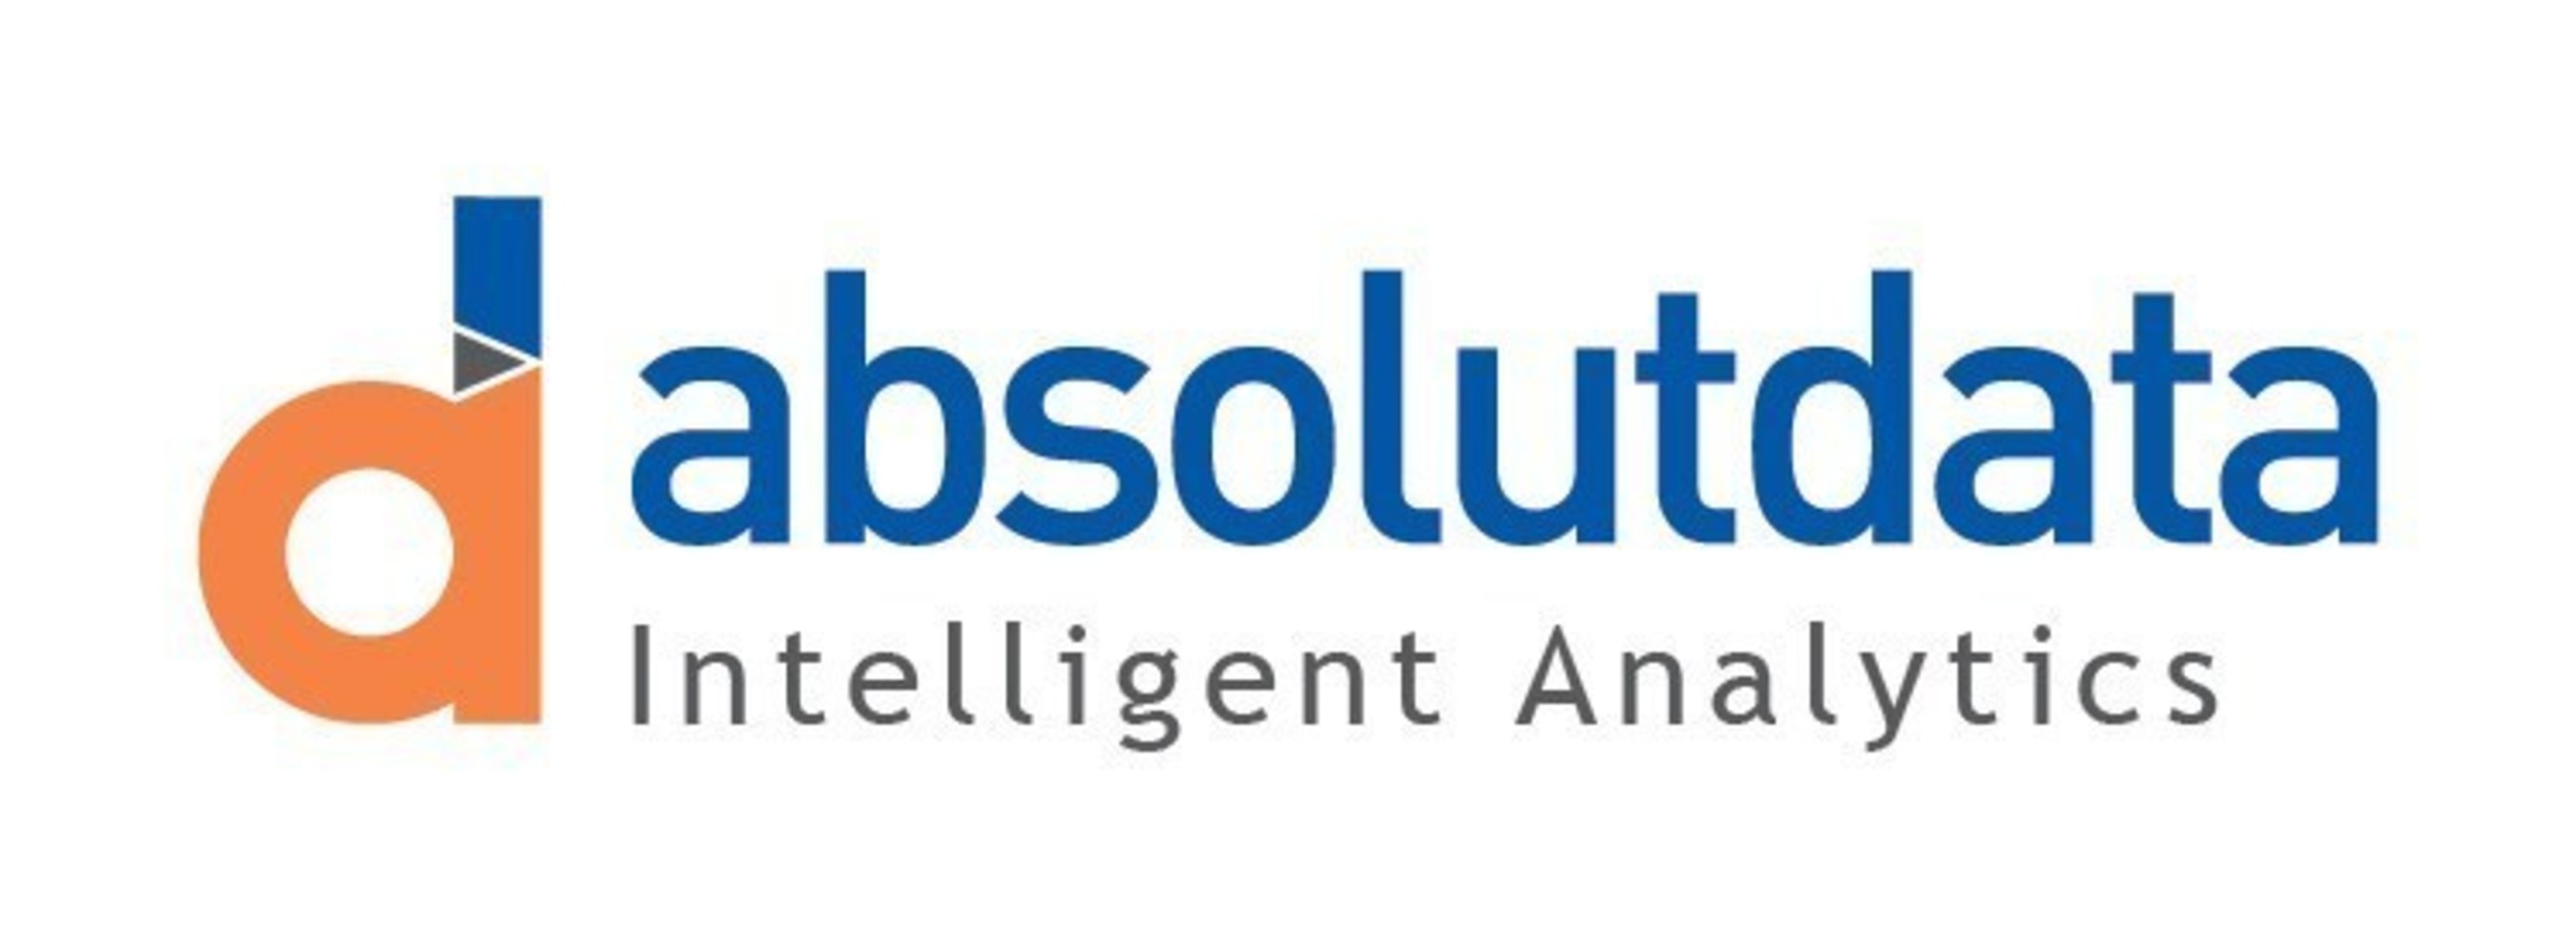 Absolutdata Launches Powerful Artificial Intelligence (AI) Based Tool that Makes Sales Teams More Effective